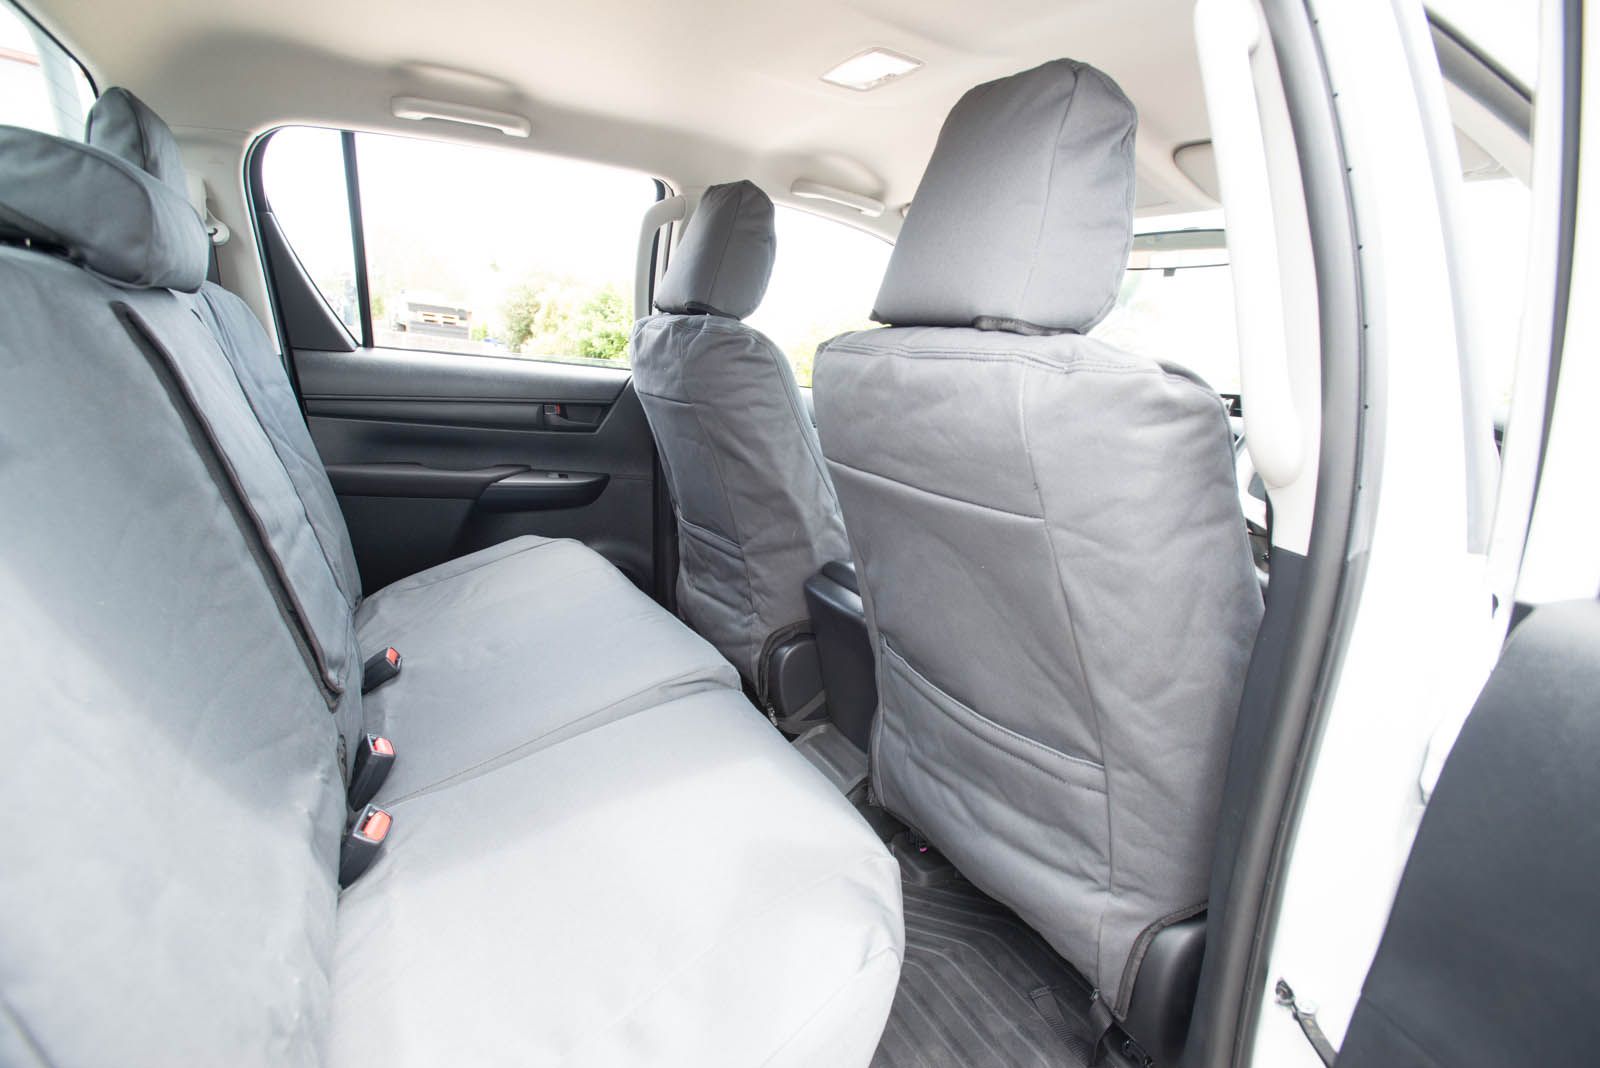 EFS SEAT COVER to suit HILUX 2015 REAR ROW